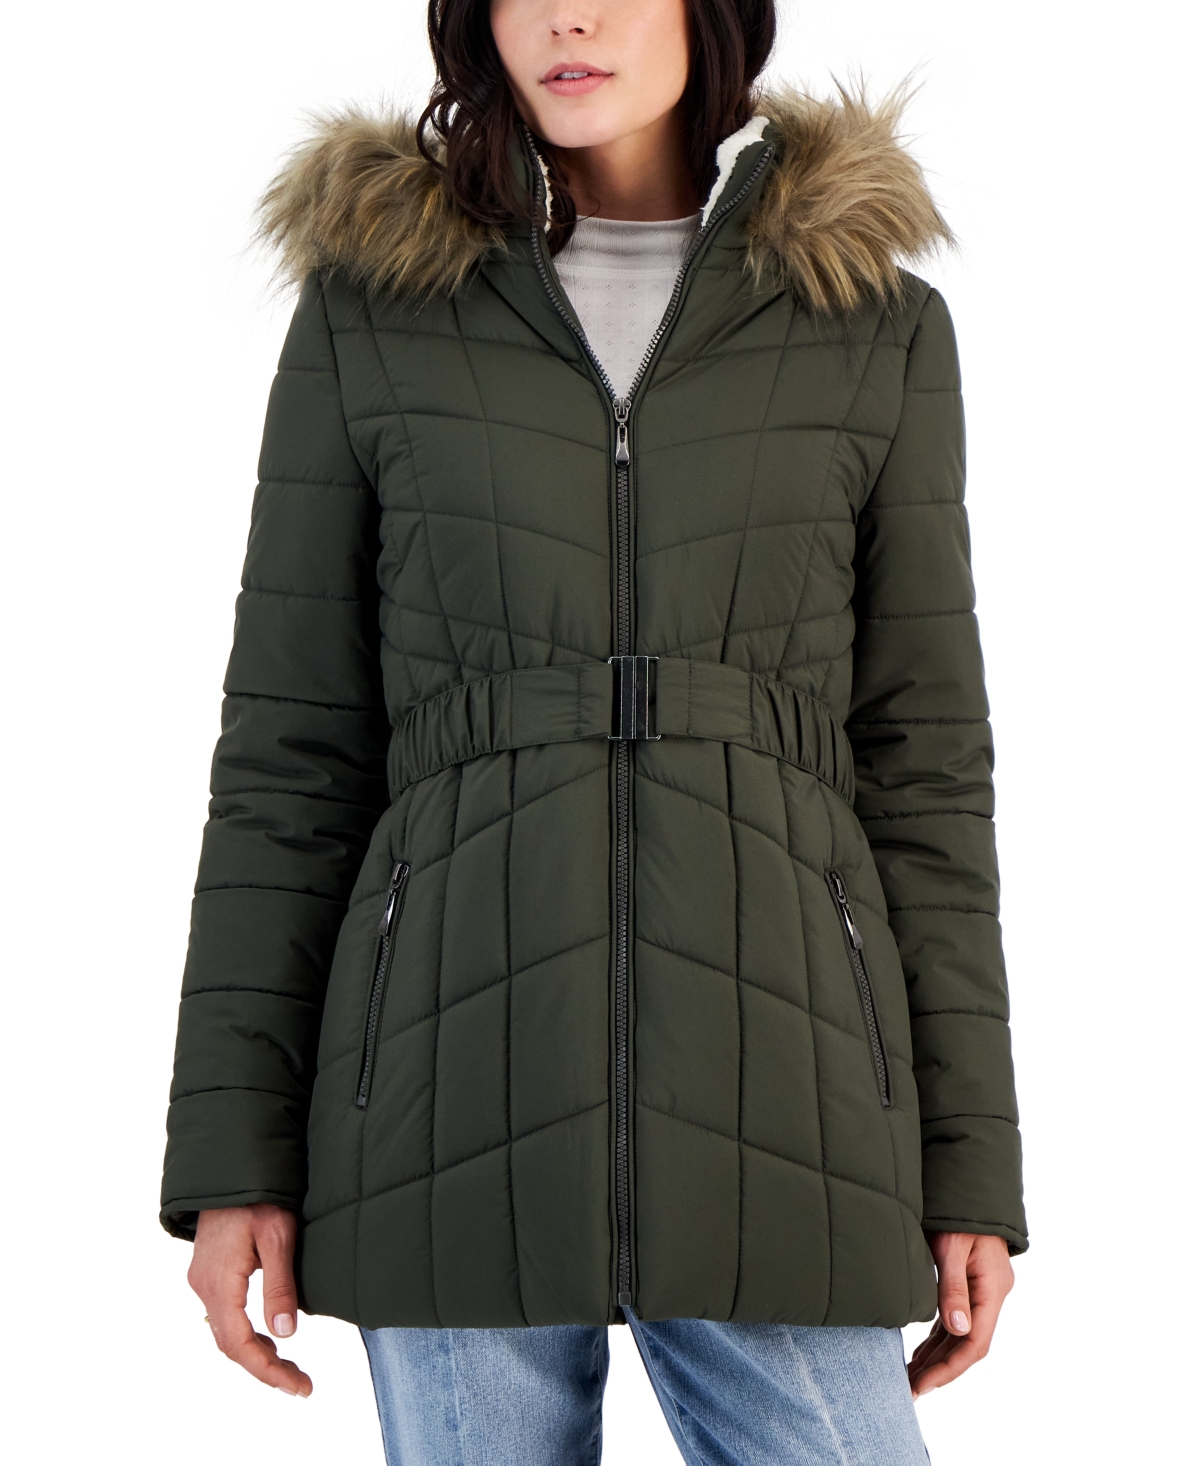 Maralyn & Me Juniors' Belted Faux-fur-hooded Puffer Coat In Olive